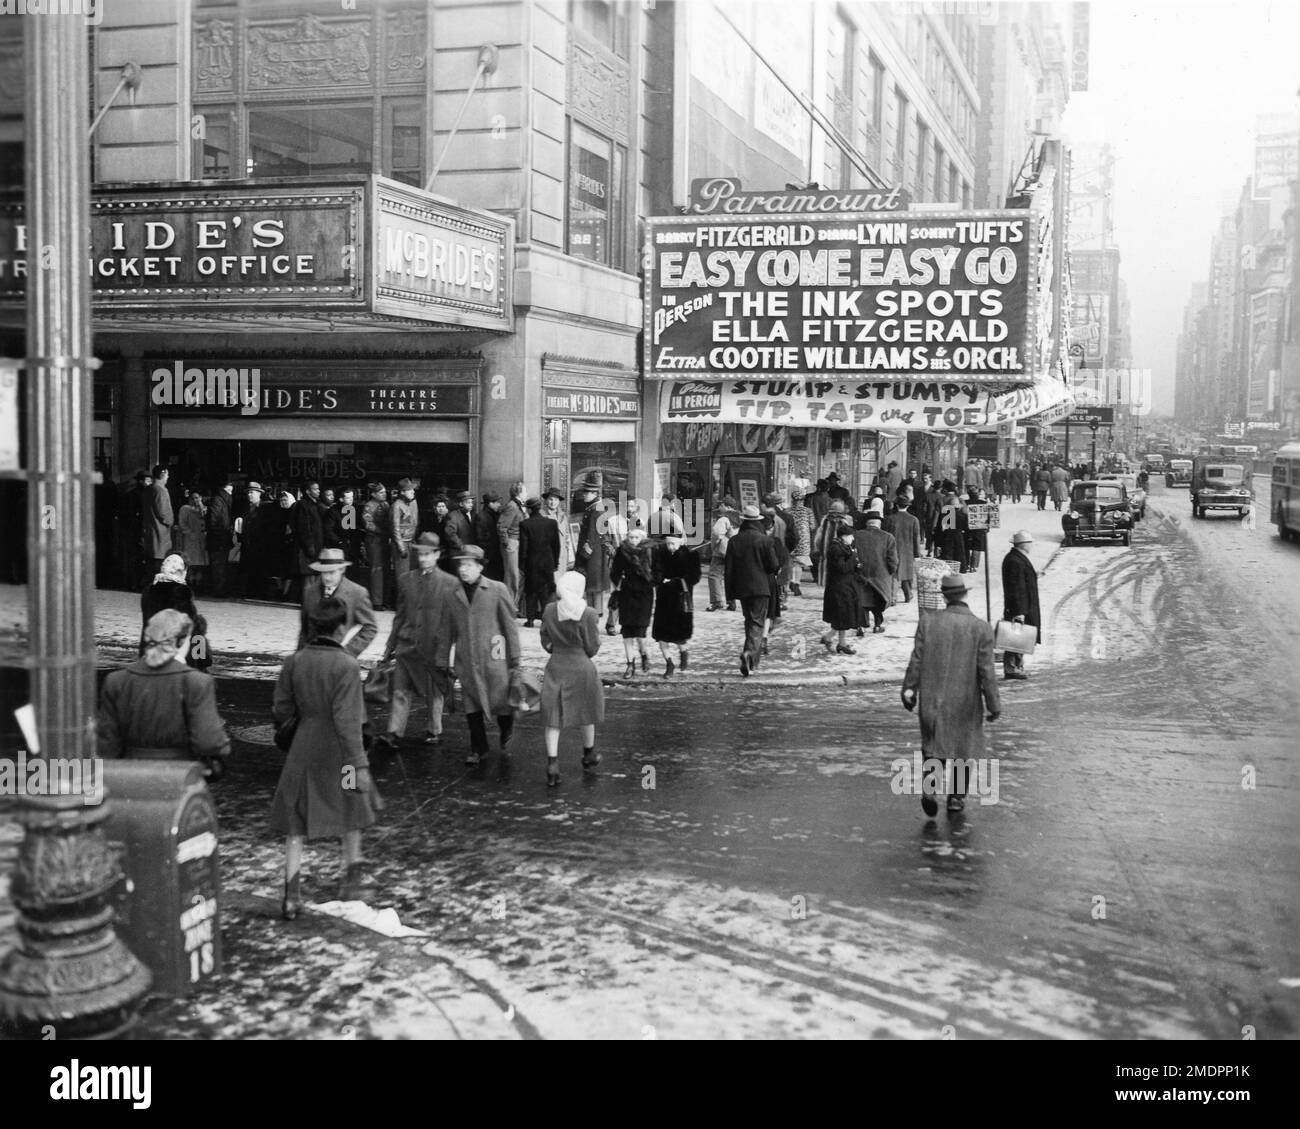 Outside of Paramount Movie Theatre in New York in February 1947 showing BARRY FITZGERALD SONNY TUFTS and DIANA LYNN in EASY COME, EASY GO 1947 director JOHN FARROW Paramount Pictures with In Person Live Appearances by The INK SPOTS and ELLA FITZGERALD Stock Photo